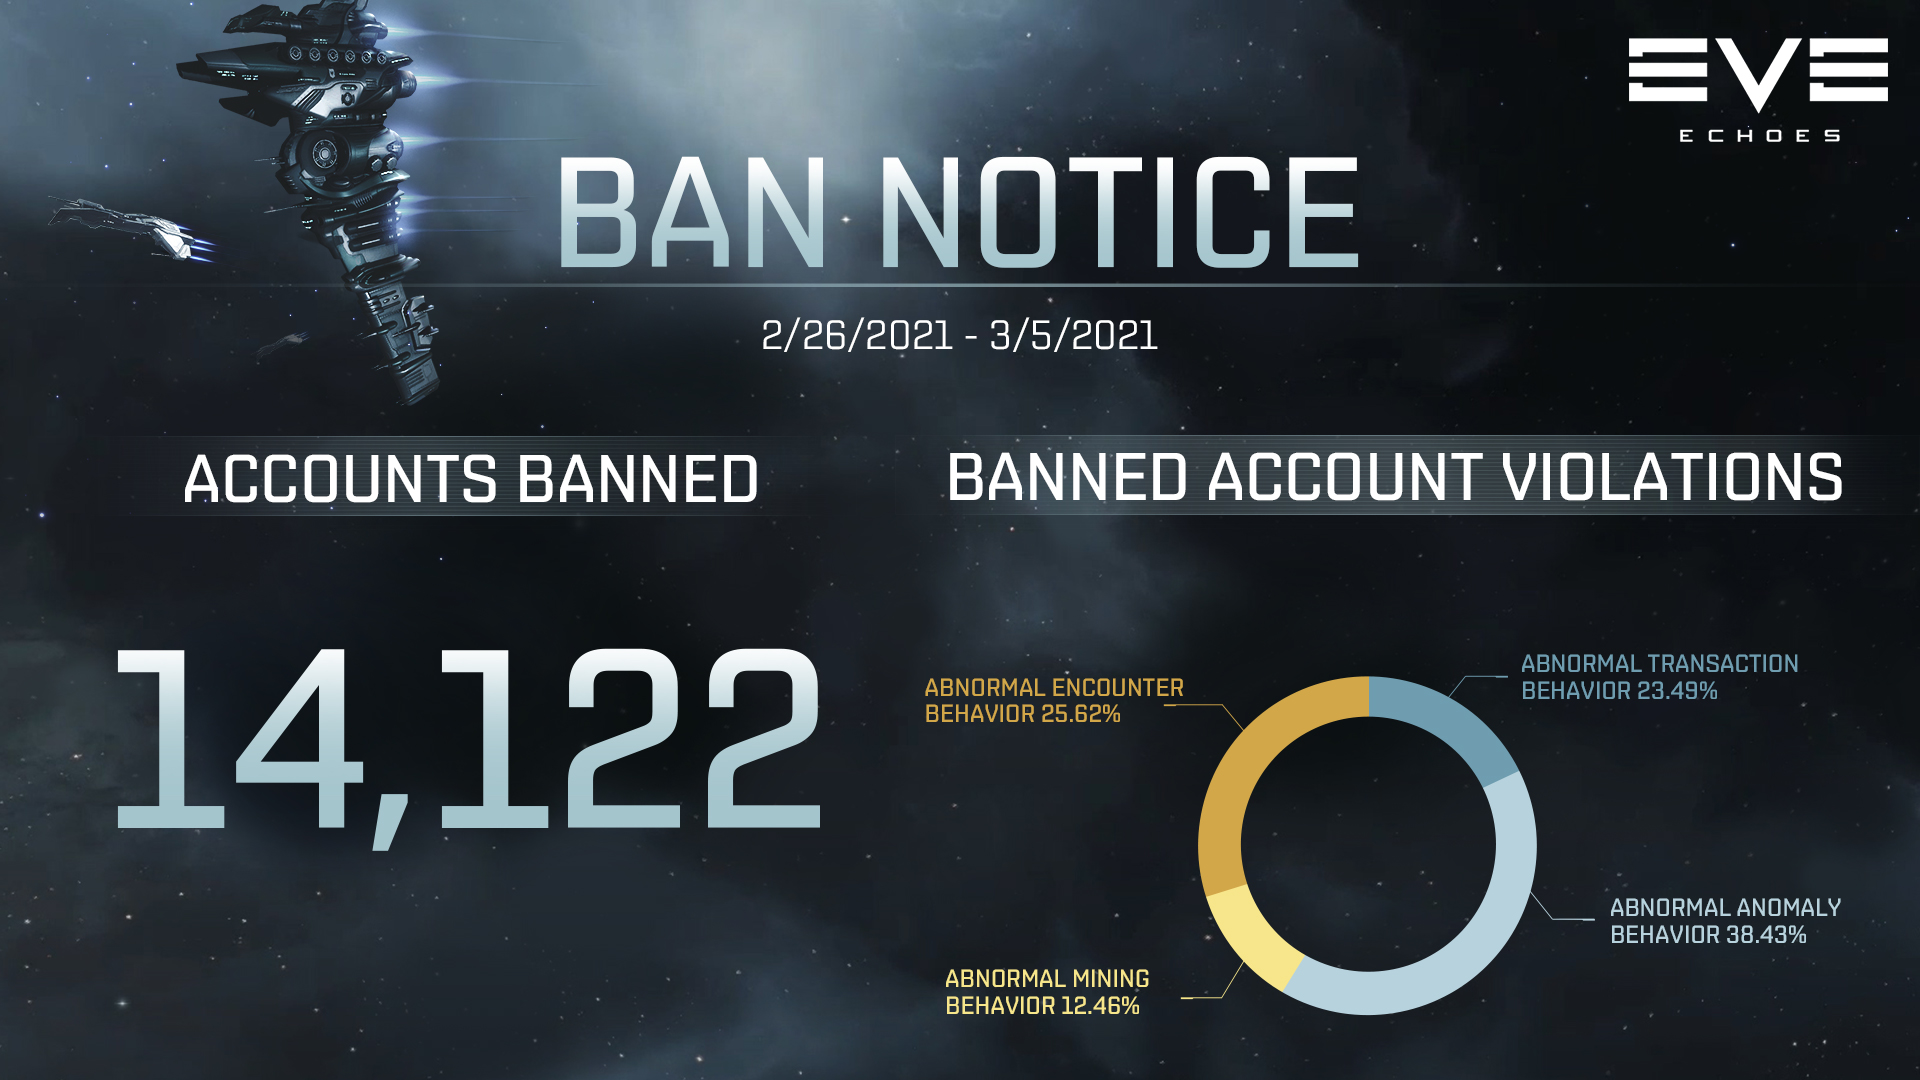 Ban Notice for 02/26-03/05